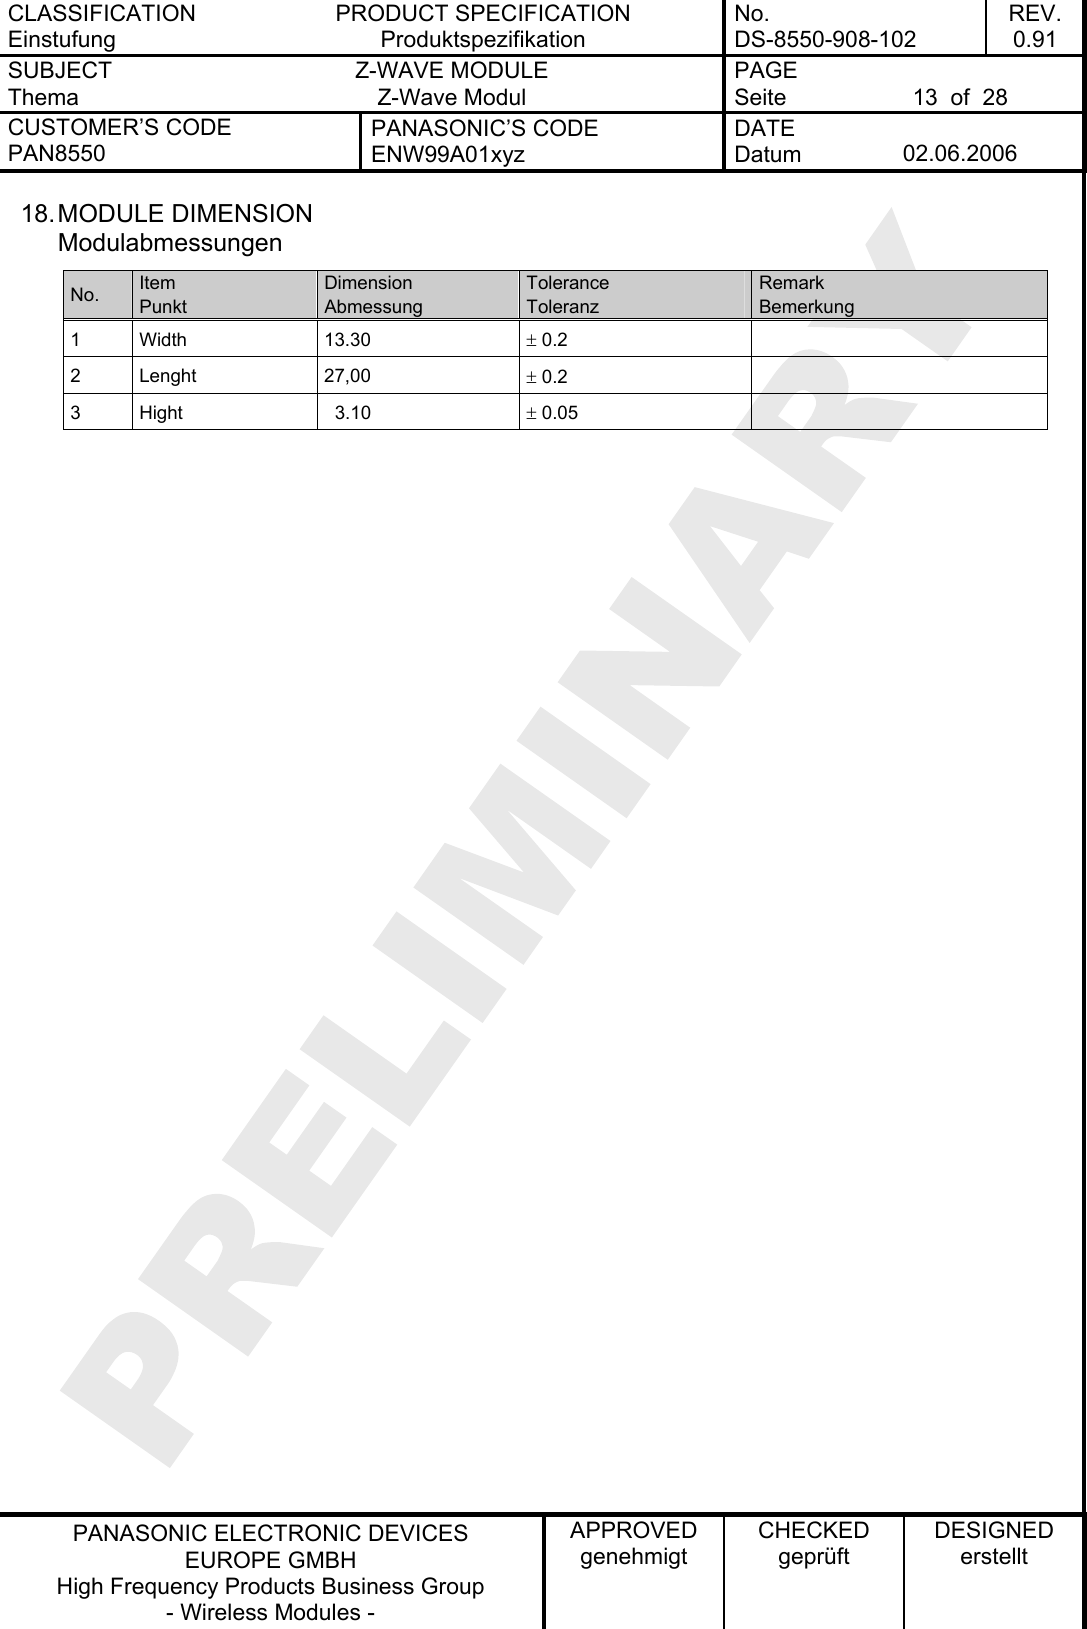 CLASSIFICATION Einstufung PRODUCT SPECIFICATION Produktspezifikation No. DS-8550-908-102 REV. 0.91 SUBJECT Thema Z-WAVE MODULE Z-Wave Modul PAGE Seite  13  of  28 CUSTOMER’S CODE PAN8550 PANASONIC’S CODE ENW99A01xyz DATE Datum  02.06.2006   PANASONIC ELECTRONIC DEVICES EUROPE GMBH High Frequency Products Business Group - Wireless Modules - APPROVED genehmigt CHECKED geprüft DESIGNED erstellt 18. MODULE  DIMENSION Modulabmessungen No.  Item Punkt Dimension Abmessung Tolerance Toleranz Remark Bemerkung 1 Width  13.30  ± 0.2   2 Lenght  27,00  ± 0.2   3  Hight    3.10  ± 0.05      